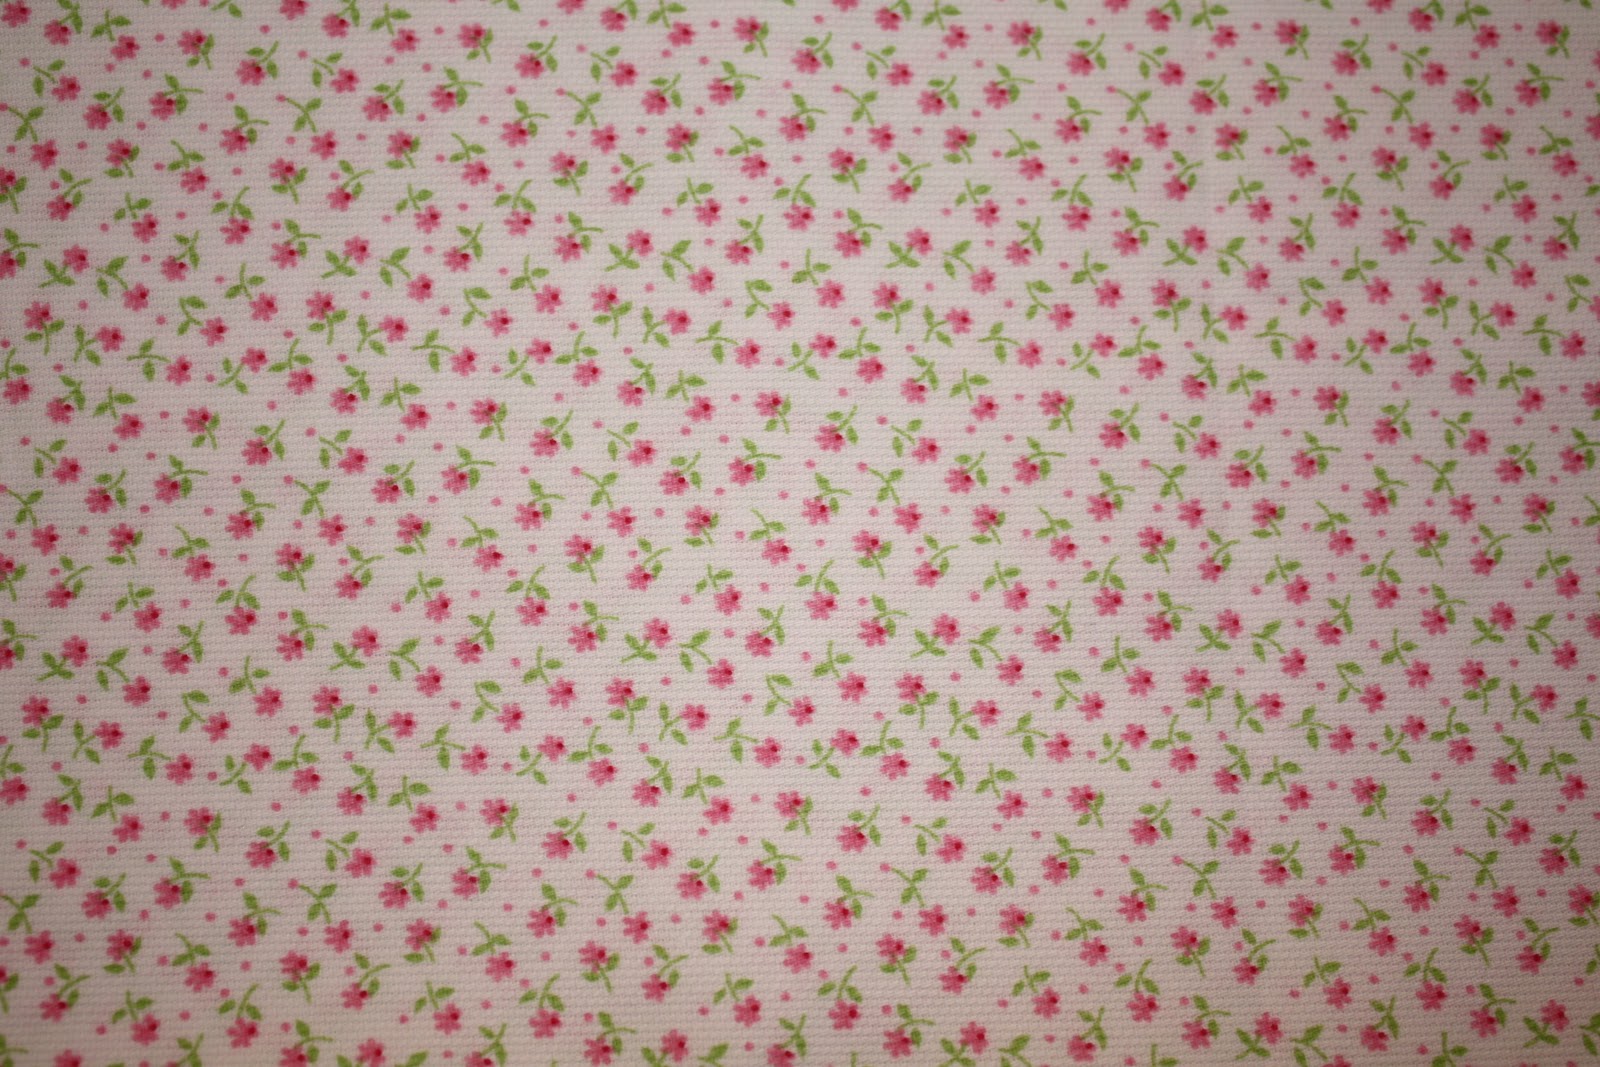 They are the same pique fabric in pink and blue by Fabric Finders!! I cannot wait to use them in my applique samples.